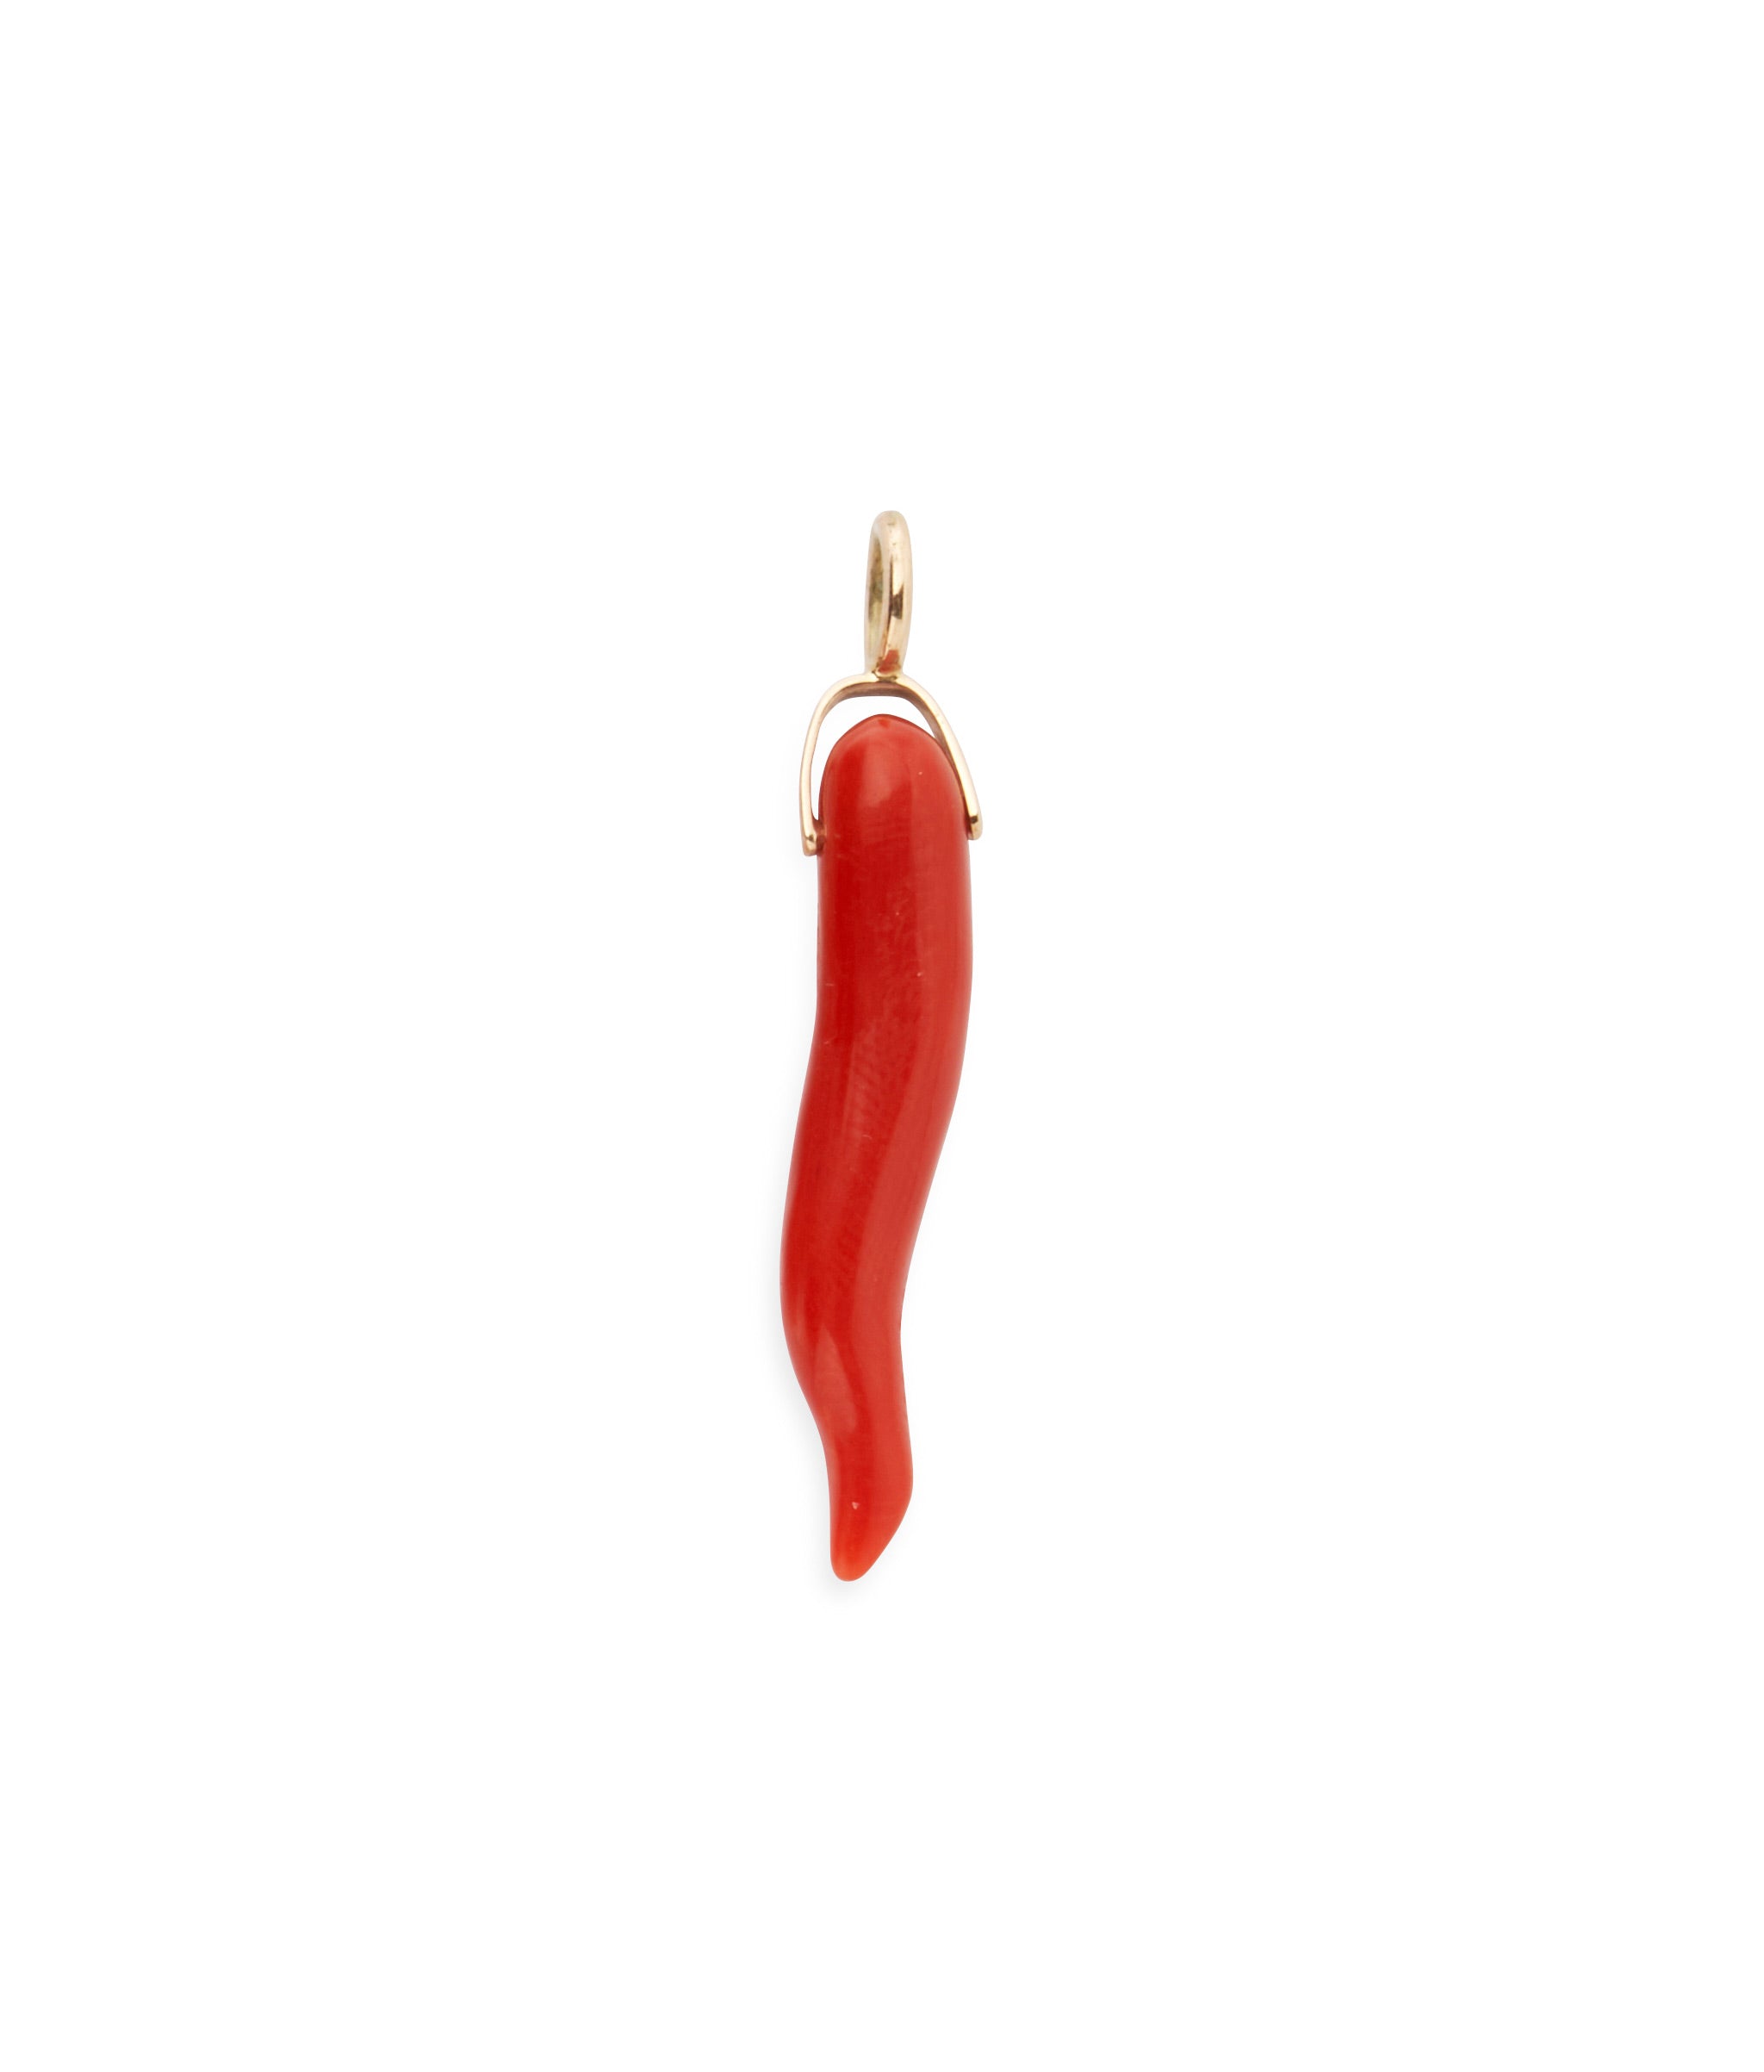 Dark Red Long Coral Horn 14K Necklace Charm. Dark red longer coral horn necklace charm with 14k gold bale and ring.